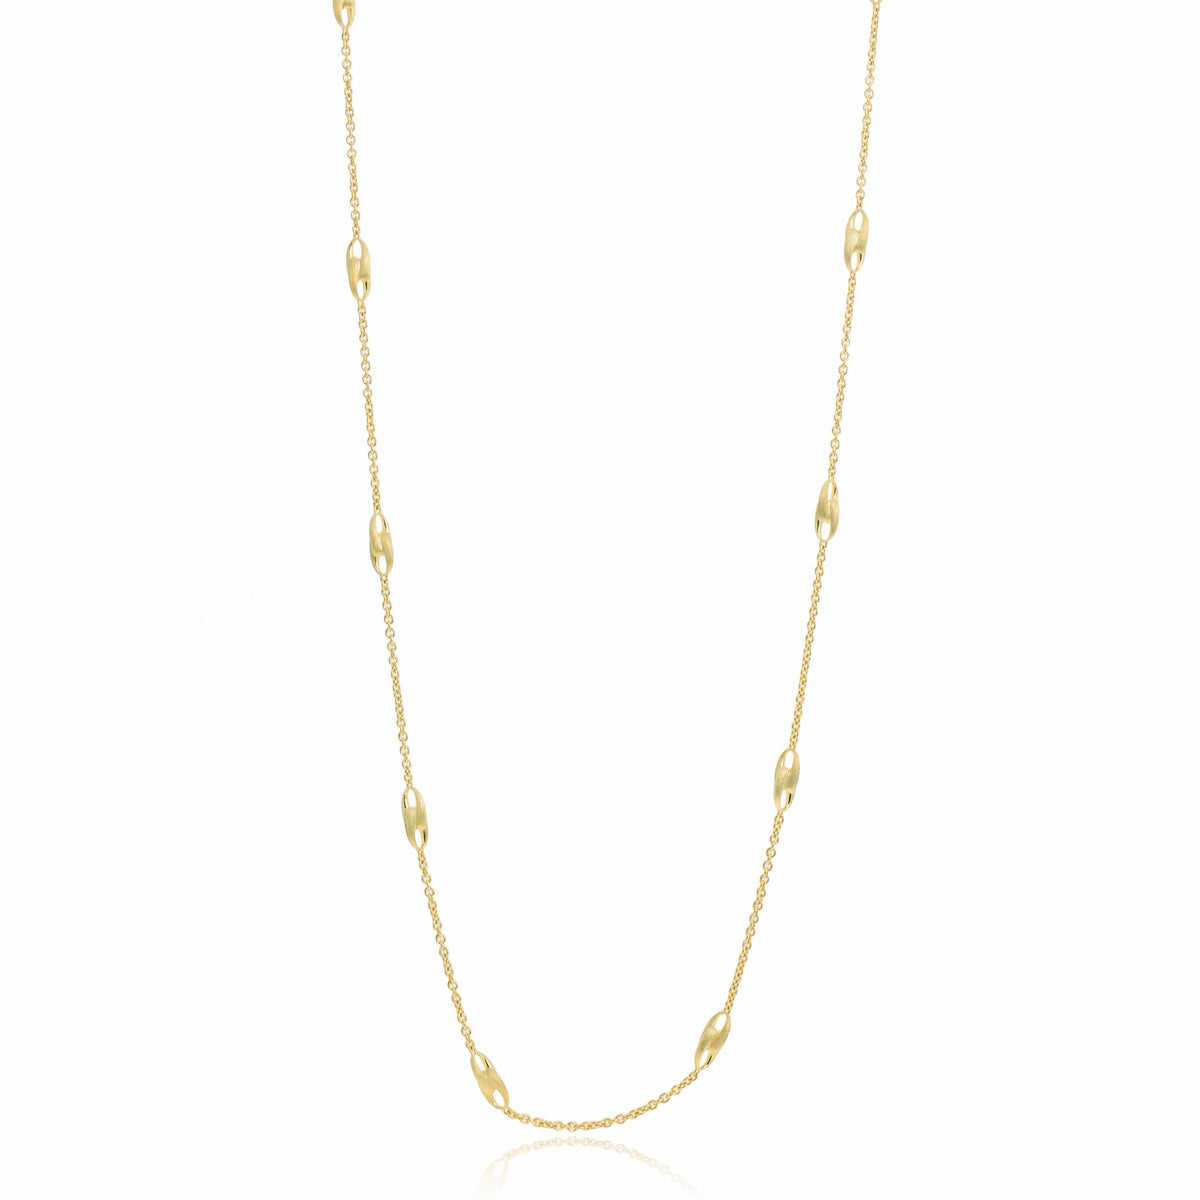 Lucia 18K Yellow Gold Link Necklace